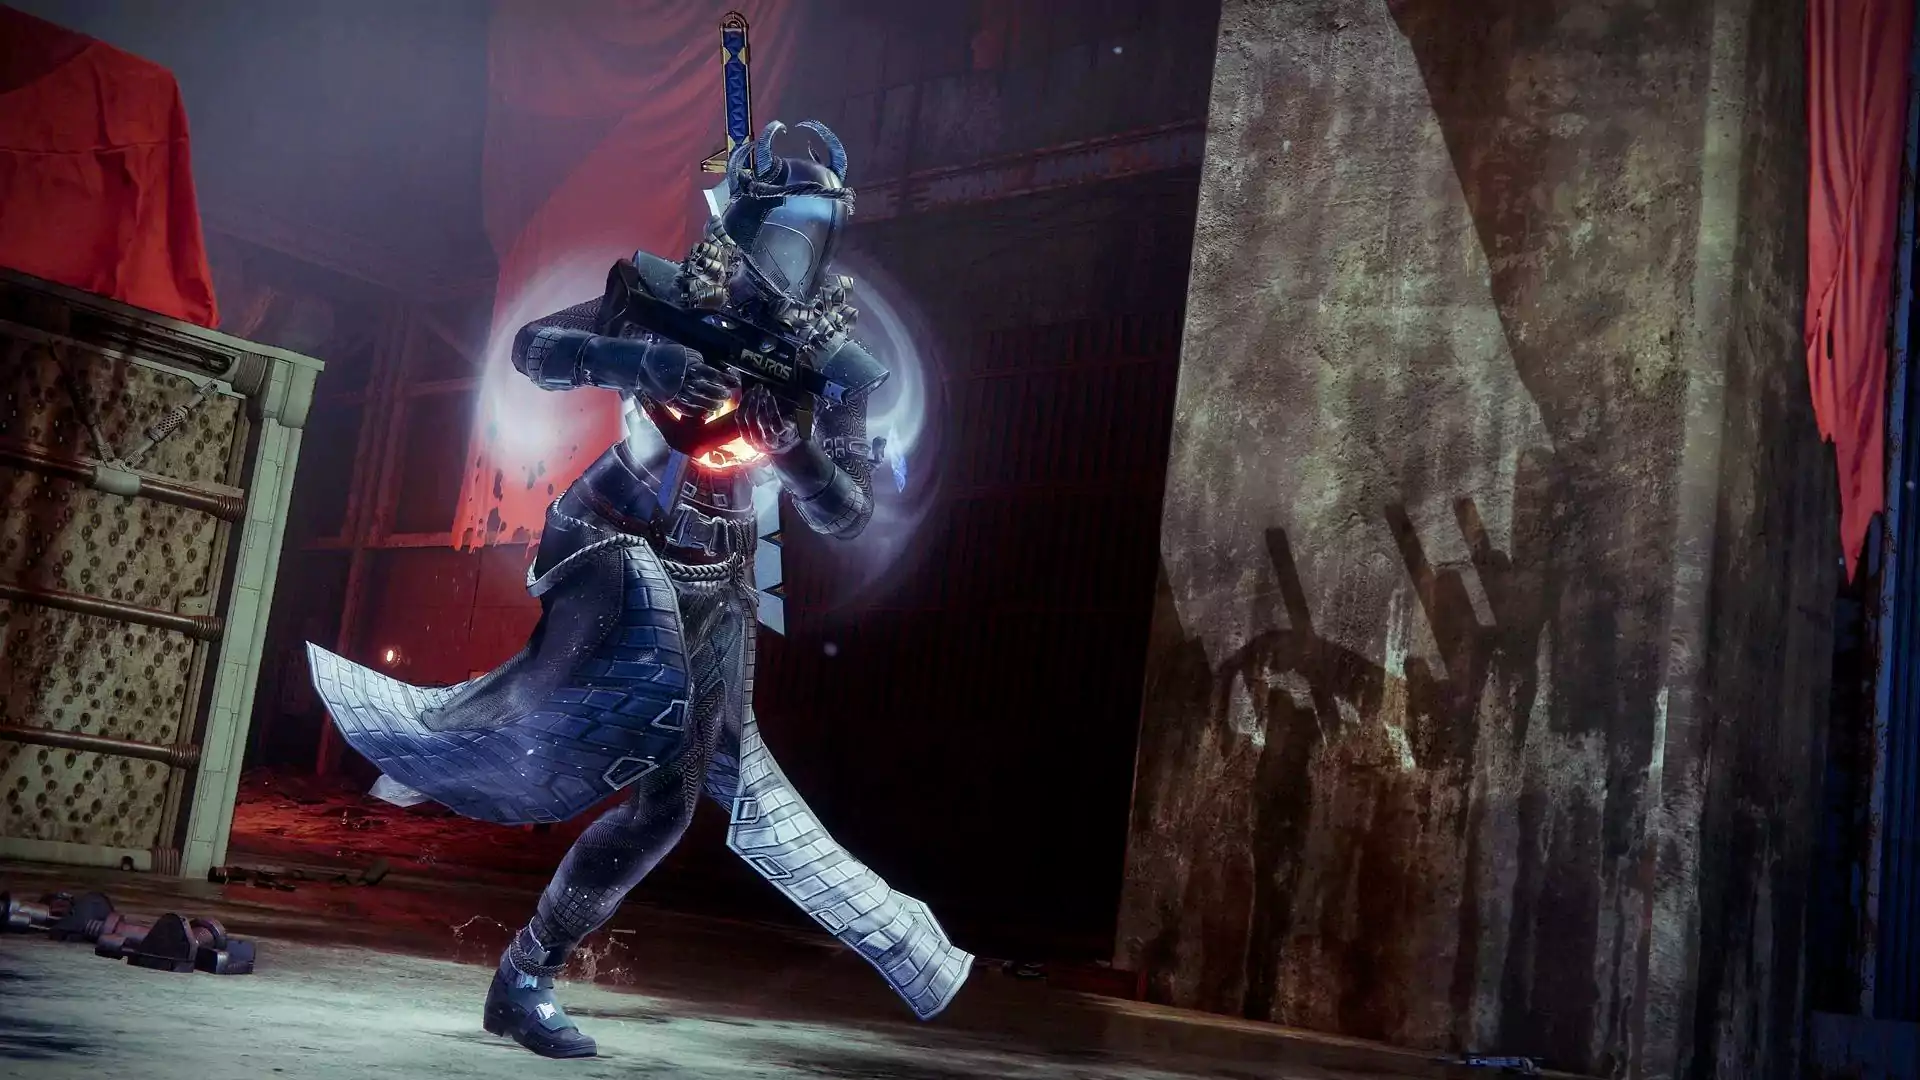 Destiny 2 players are losing interest in Iron Banner due to its low appearance per season